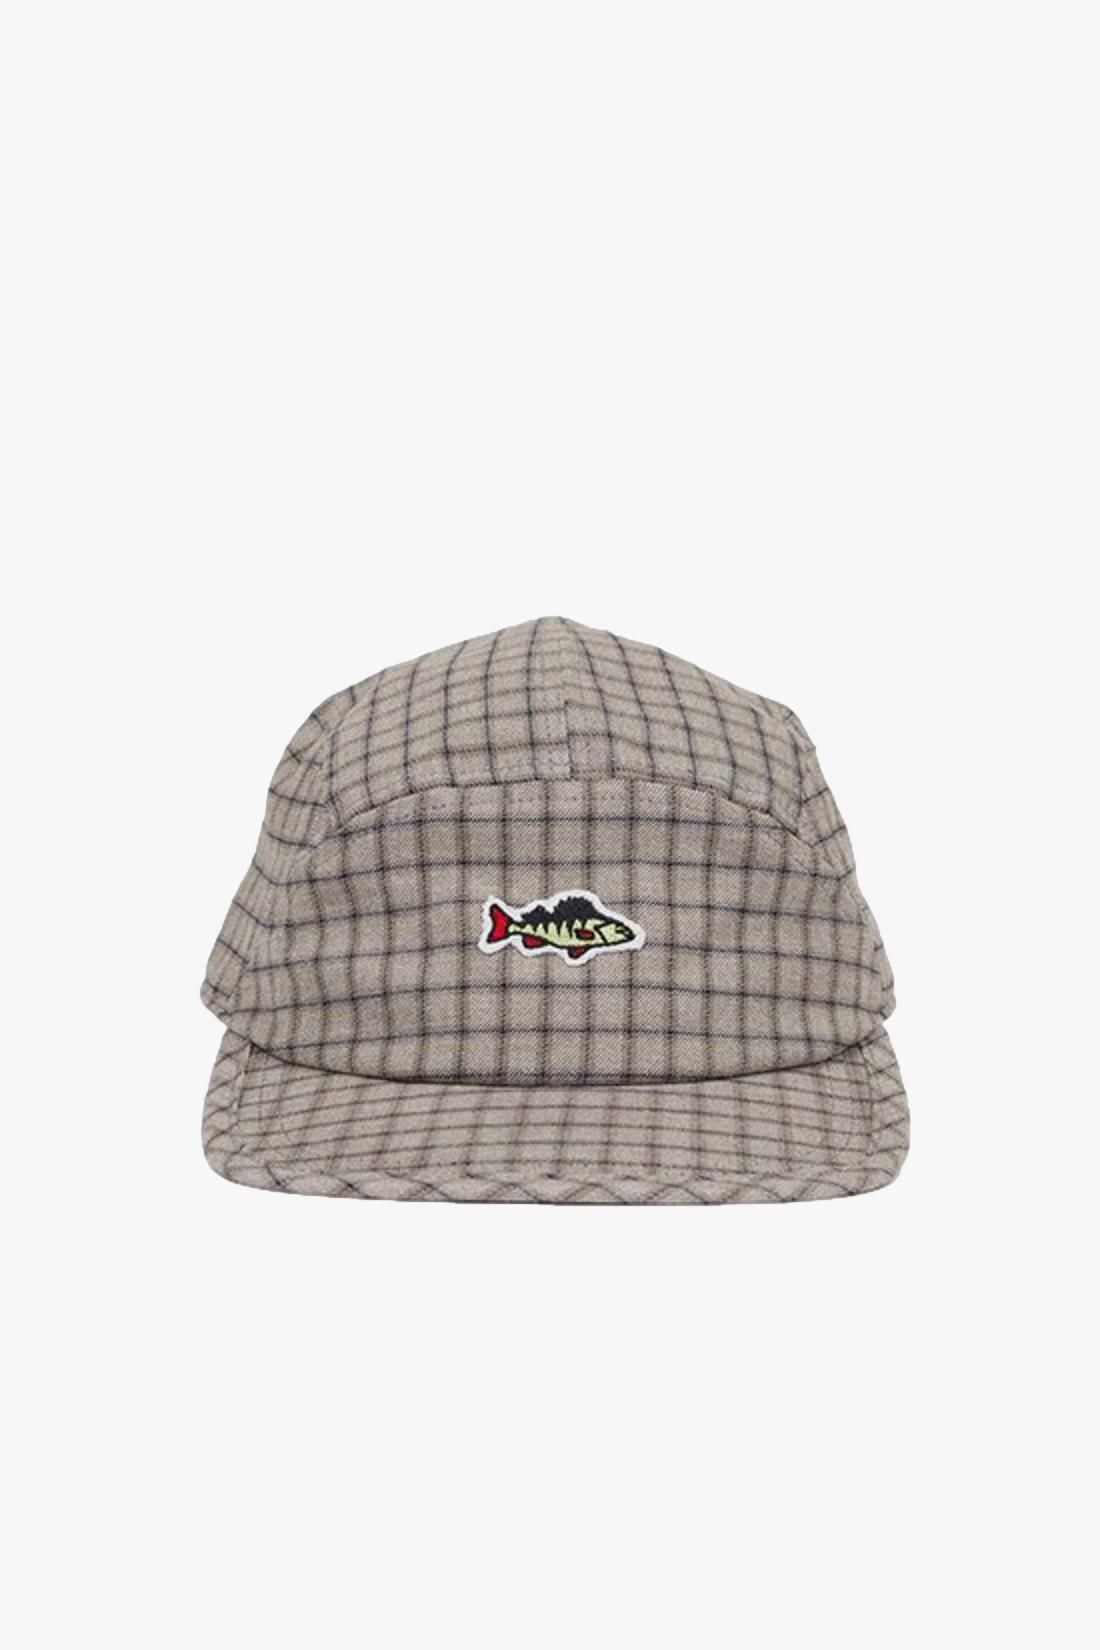 STAY HUNGRY SPORTS / Aborre camp cap flannel Check